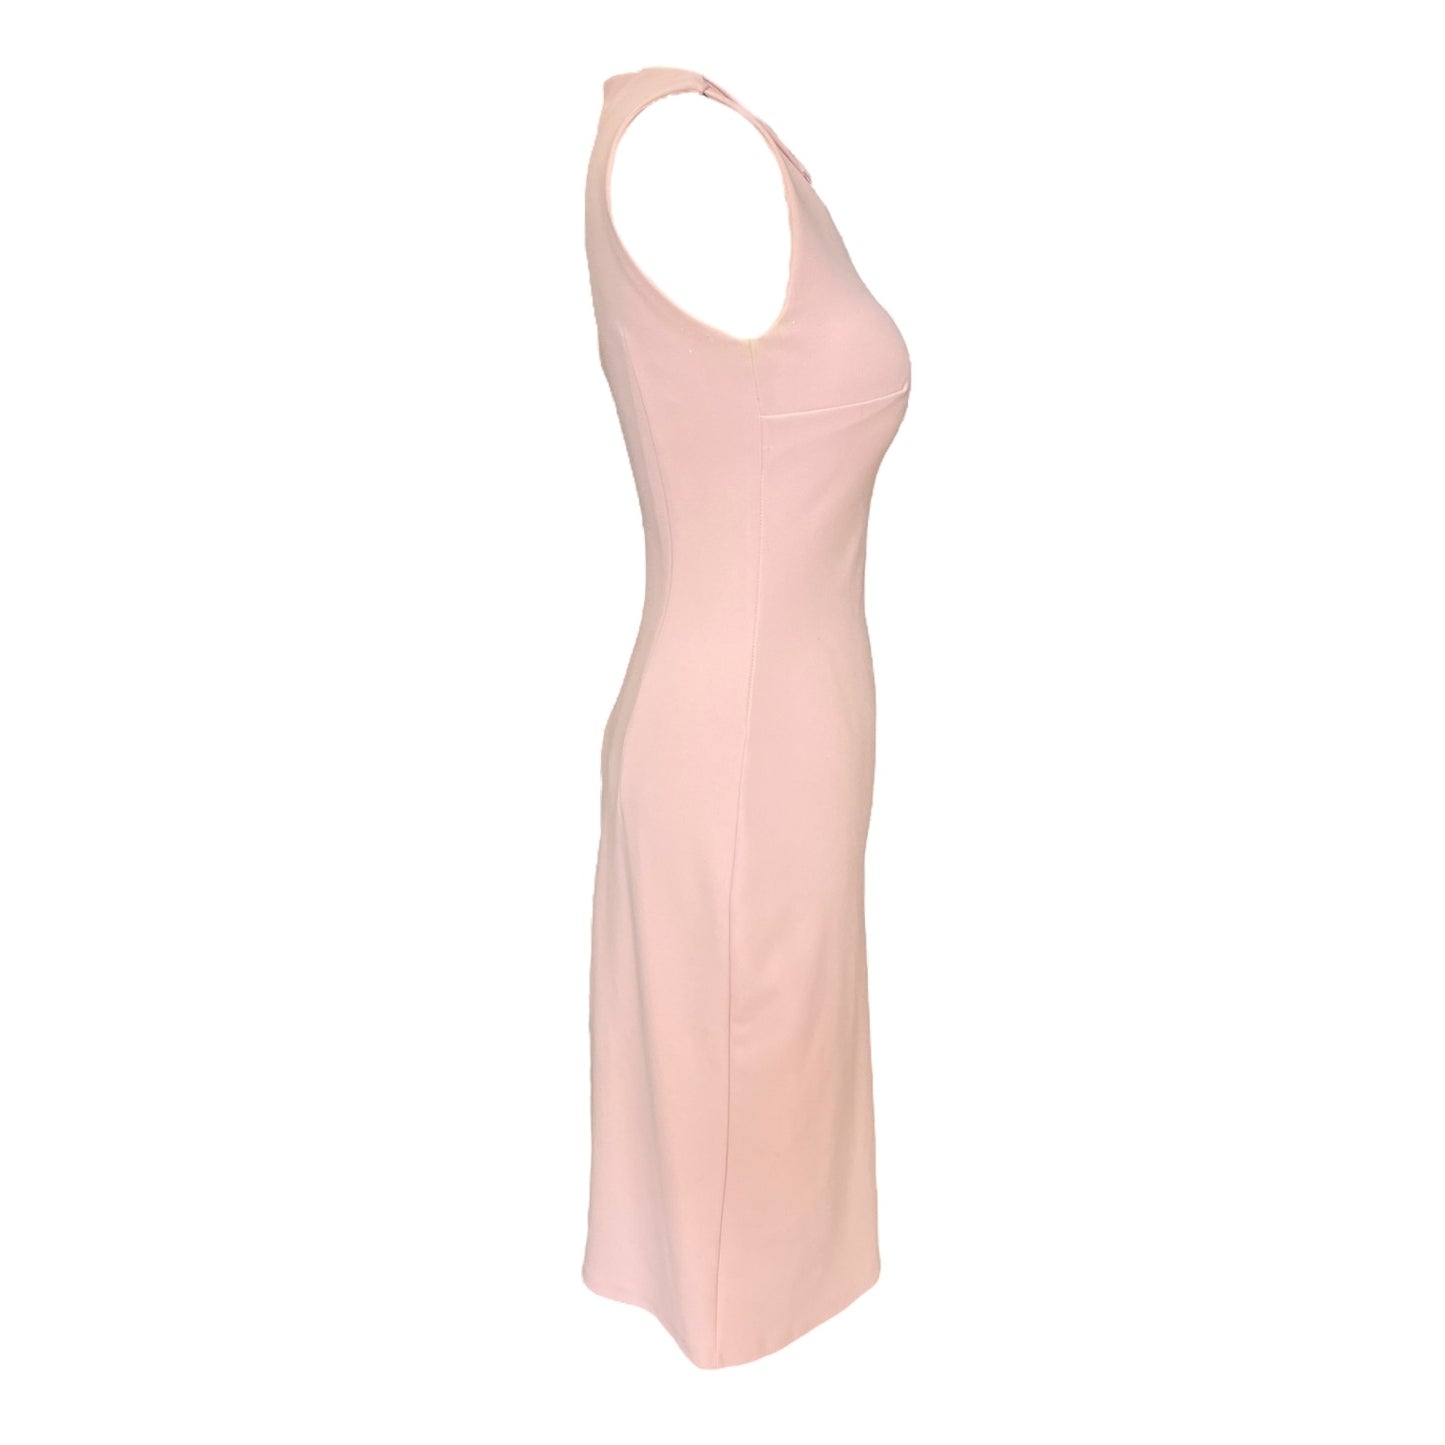 Party 21 Pink Shift Dress - 8